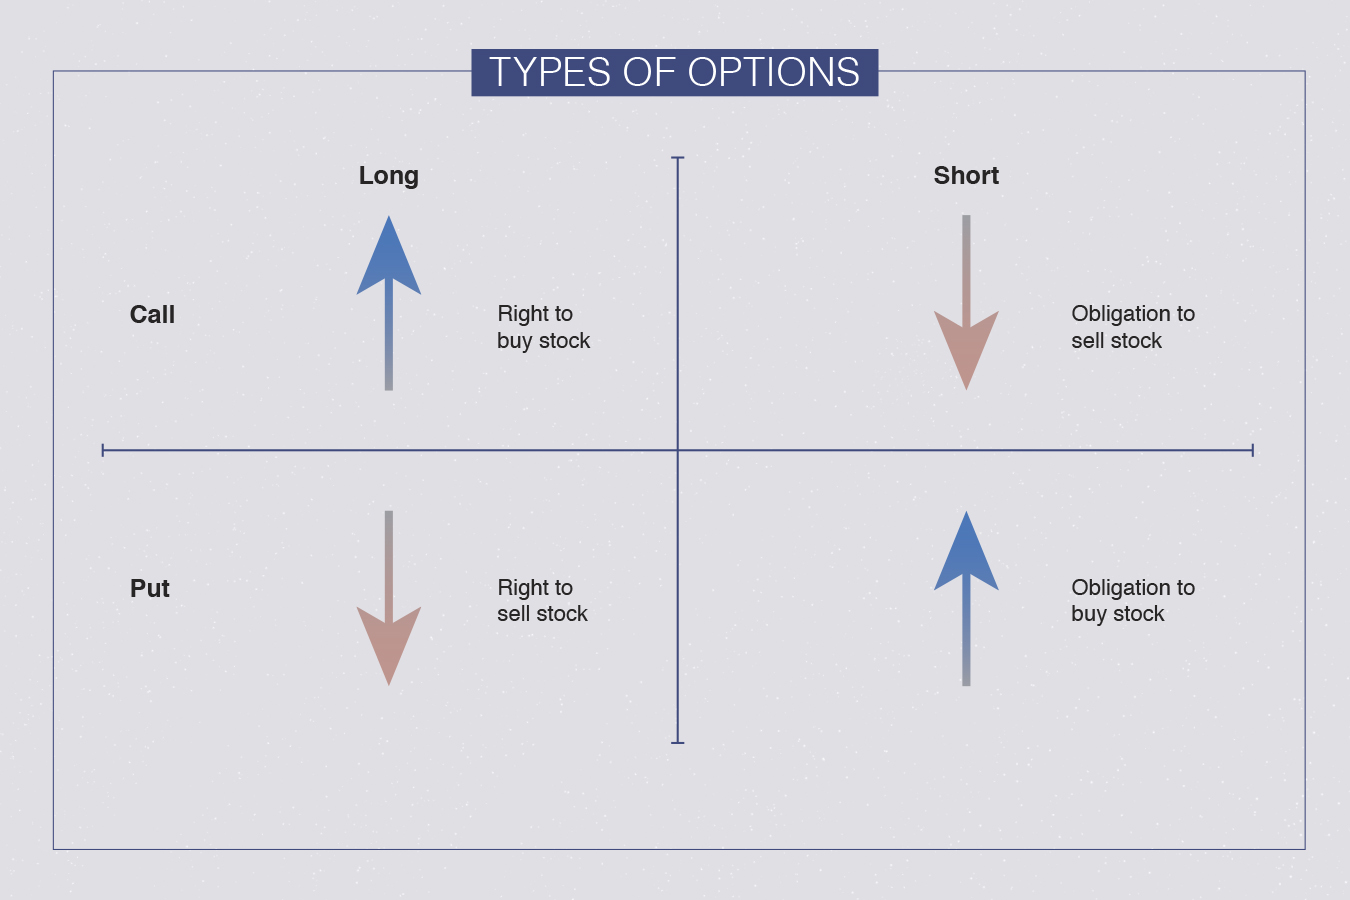 Put Options With Examples of Long, Short, Buy and Sell